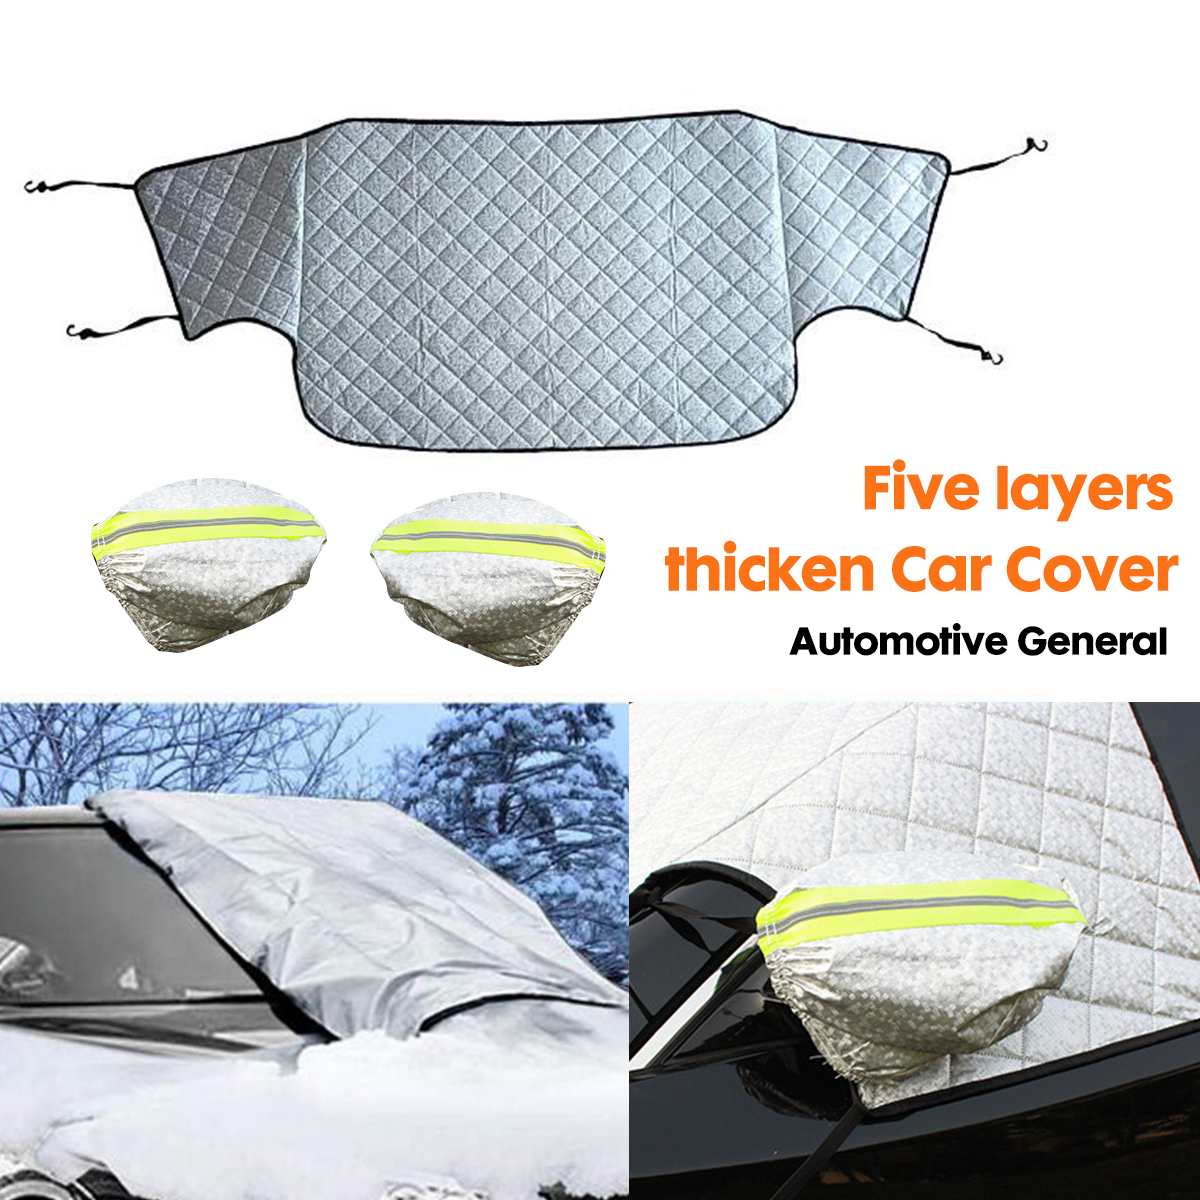 Magnets Universal Car Windshield Mirror Reflective Bar Cover 5 Layers Thicken Sun Shade Protector Winter Snow Ice Rain Dust: Thicken Type